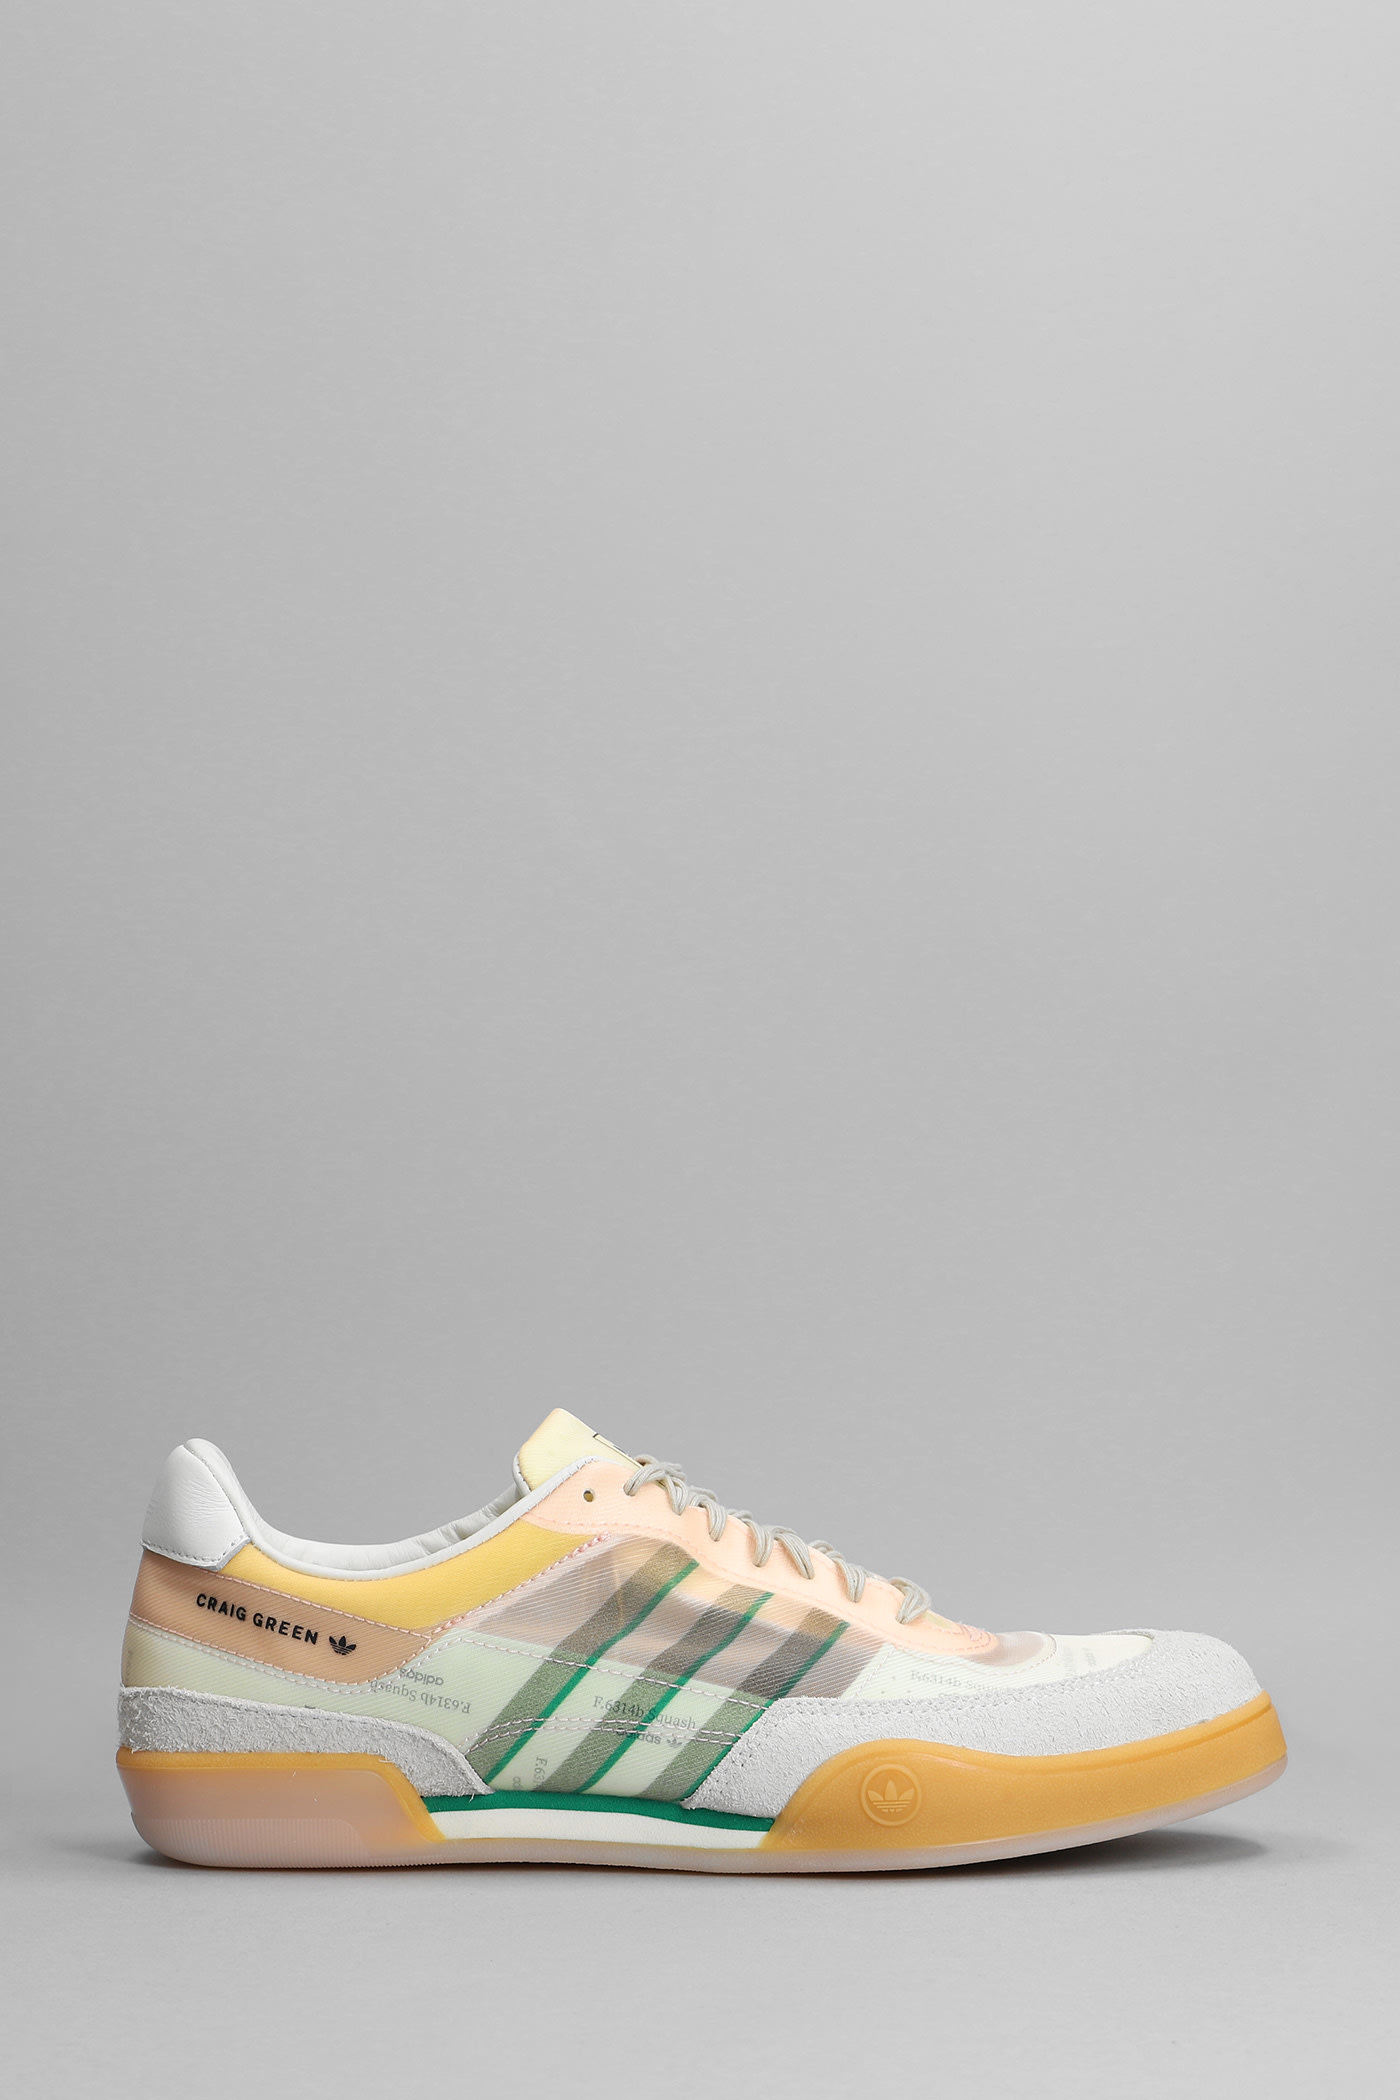 Adidas Originals by Craig Green Sneakers In Beige Leather And Fabric